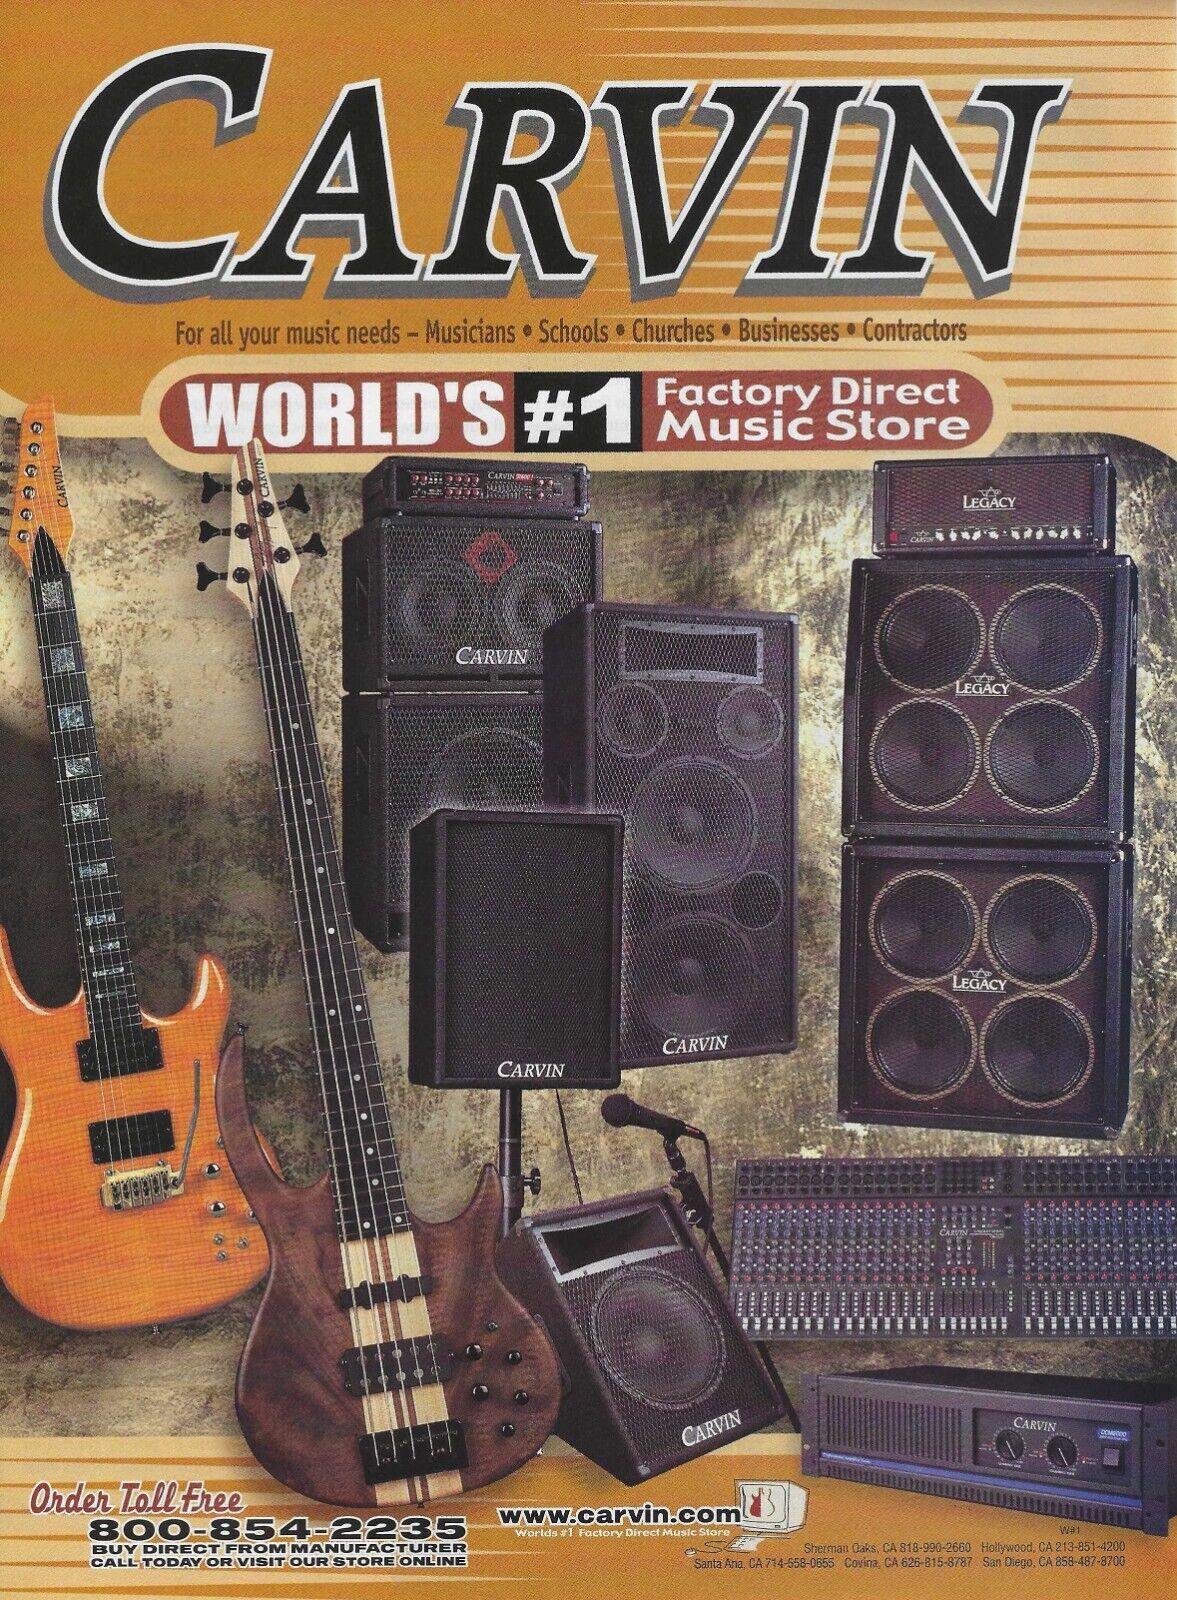 2001 Carvin Guitar Bass Amp Board Pictures Of Gear Vintage Photo Print Ad